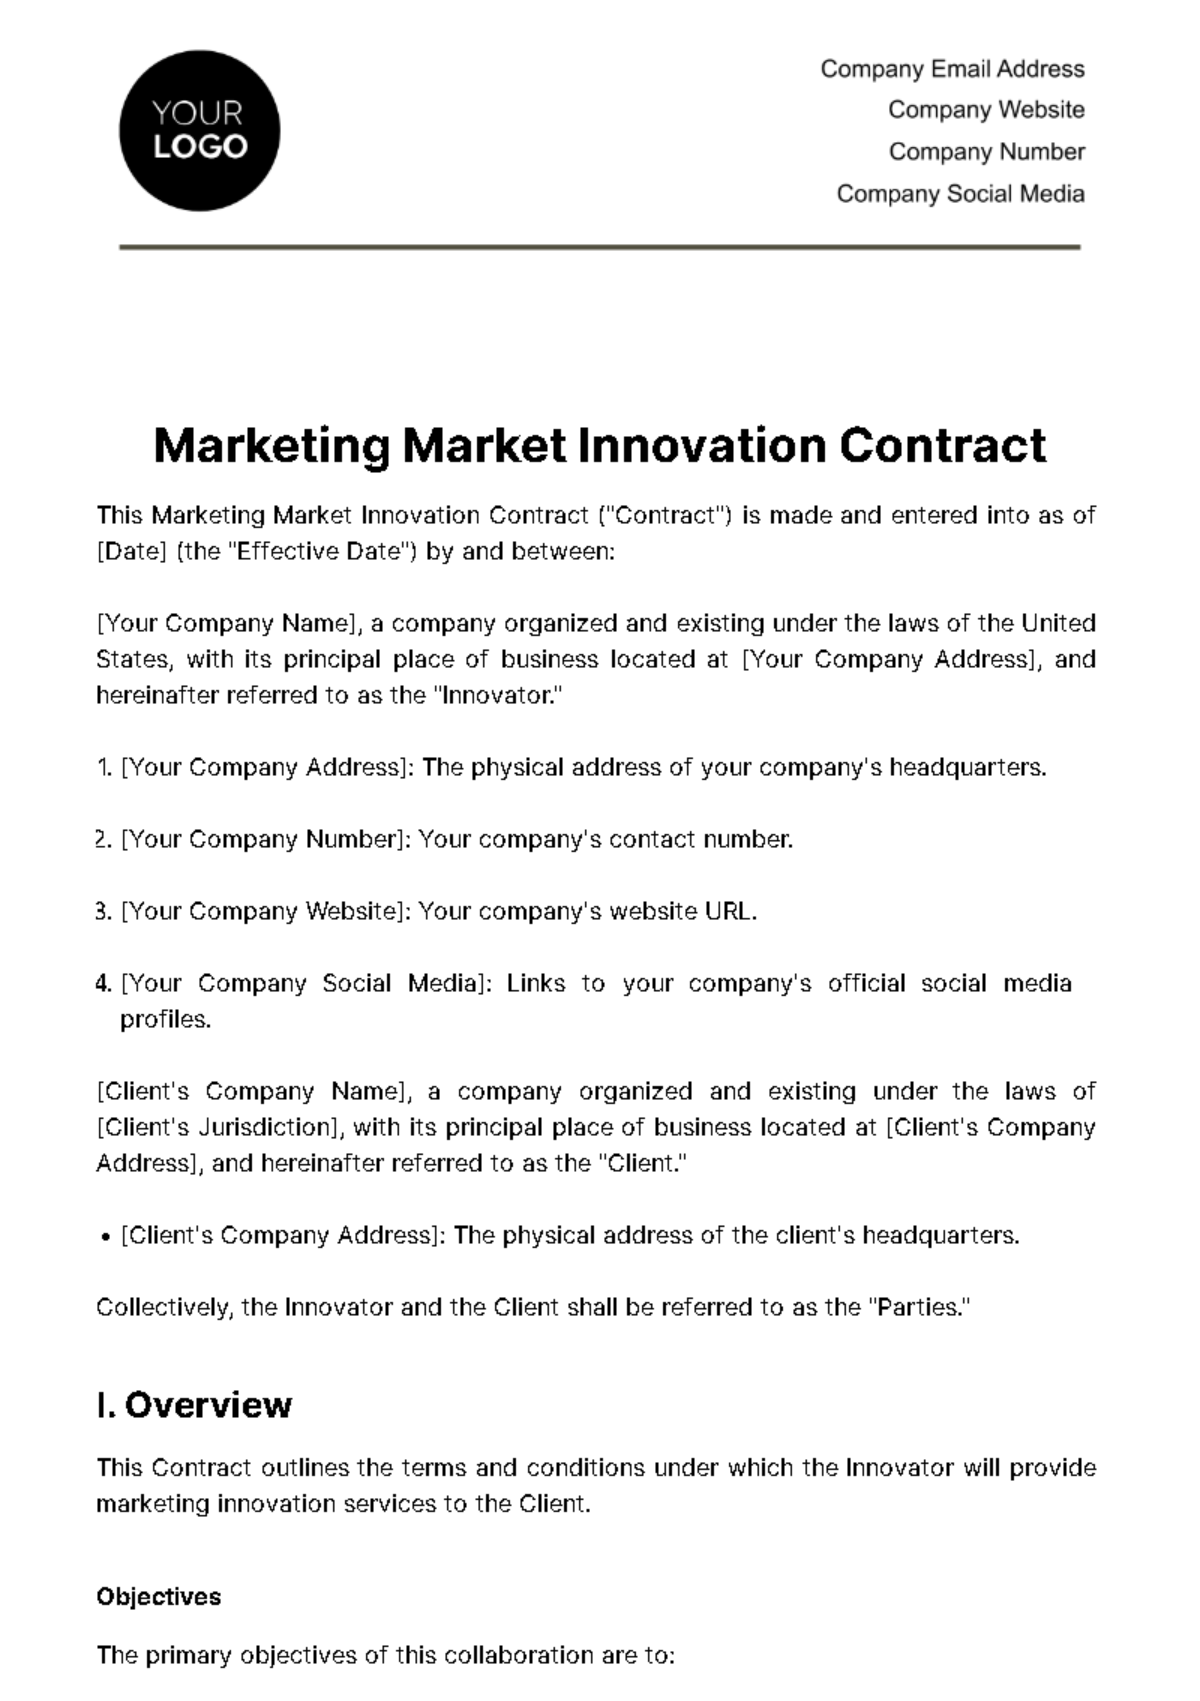 Free Marketing Market Innovation Contract Template